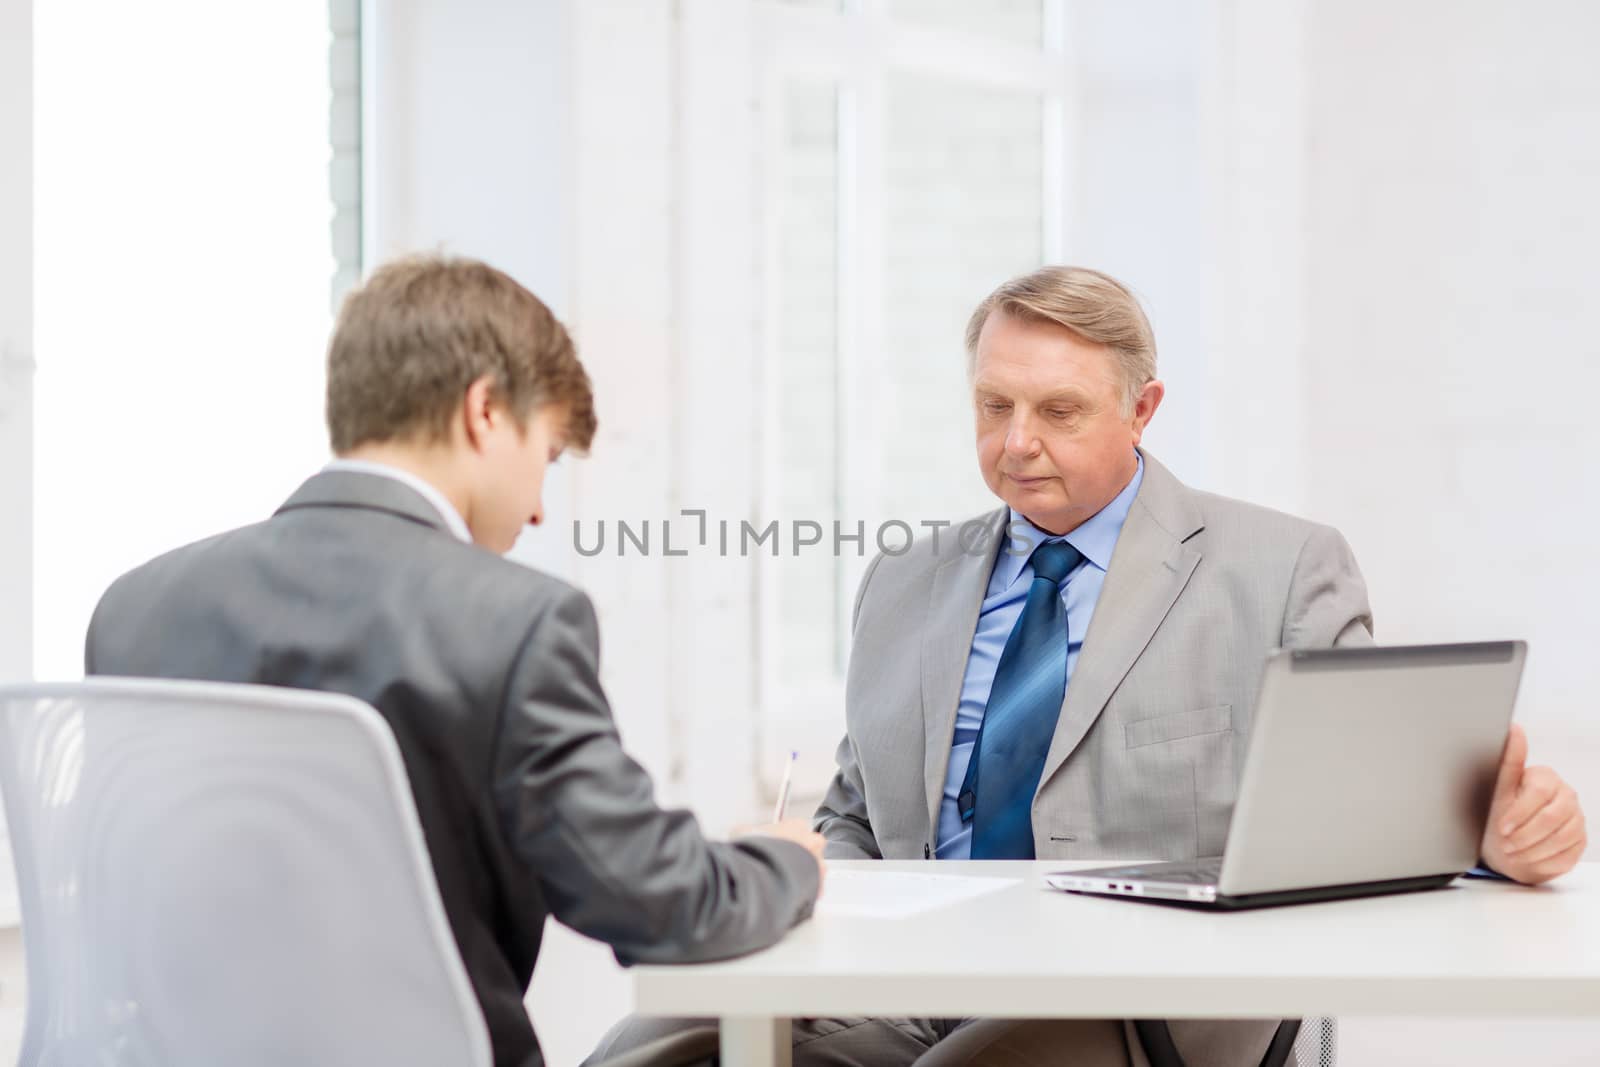 older man and young man signing papers in office by dolgachov